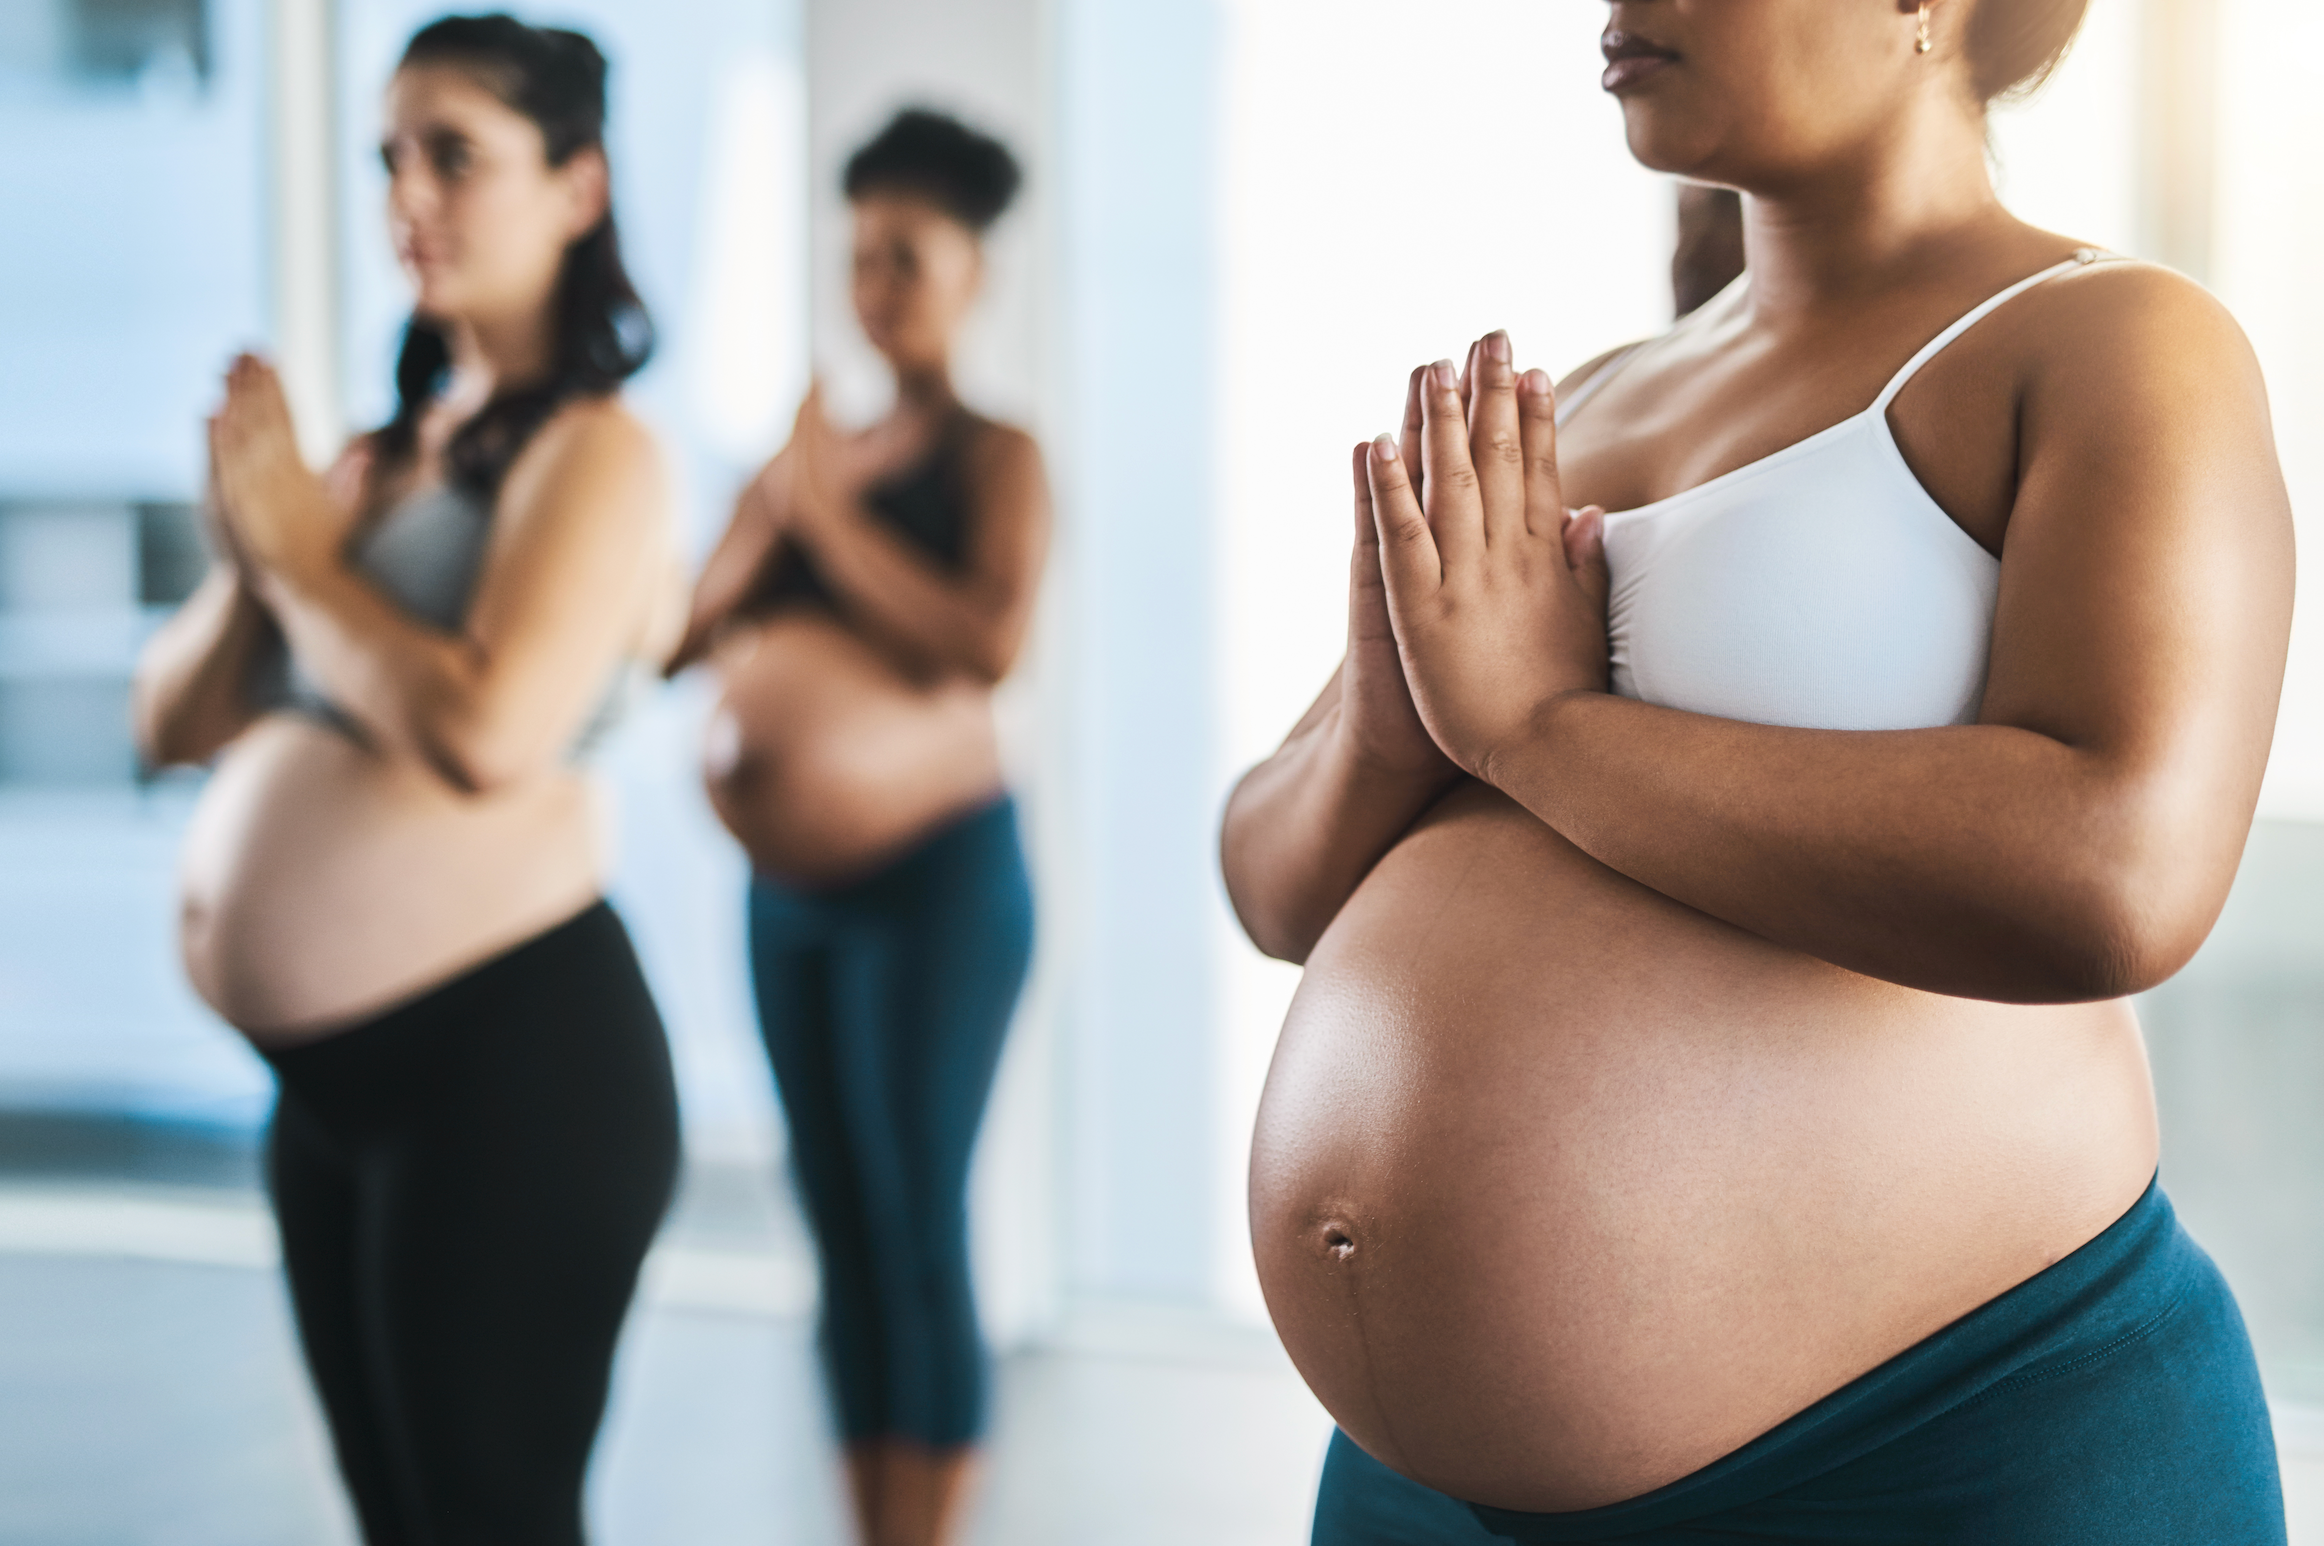 Are There Any Benefits to Exercising When Pregnant?